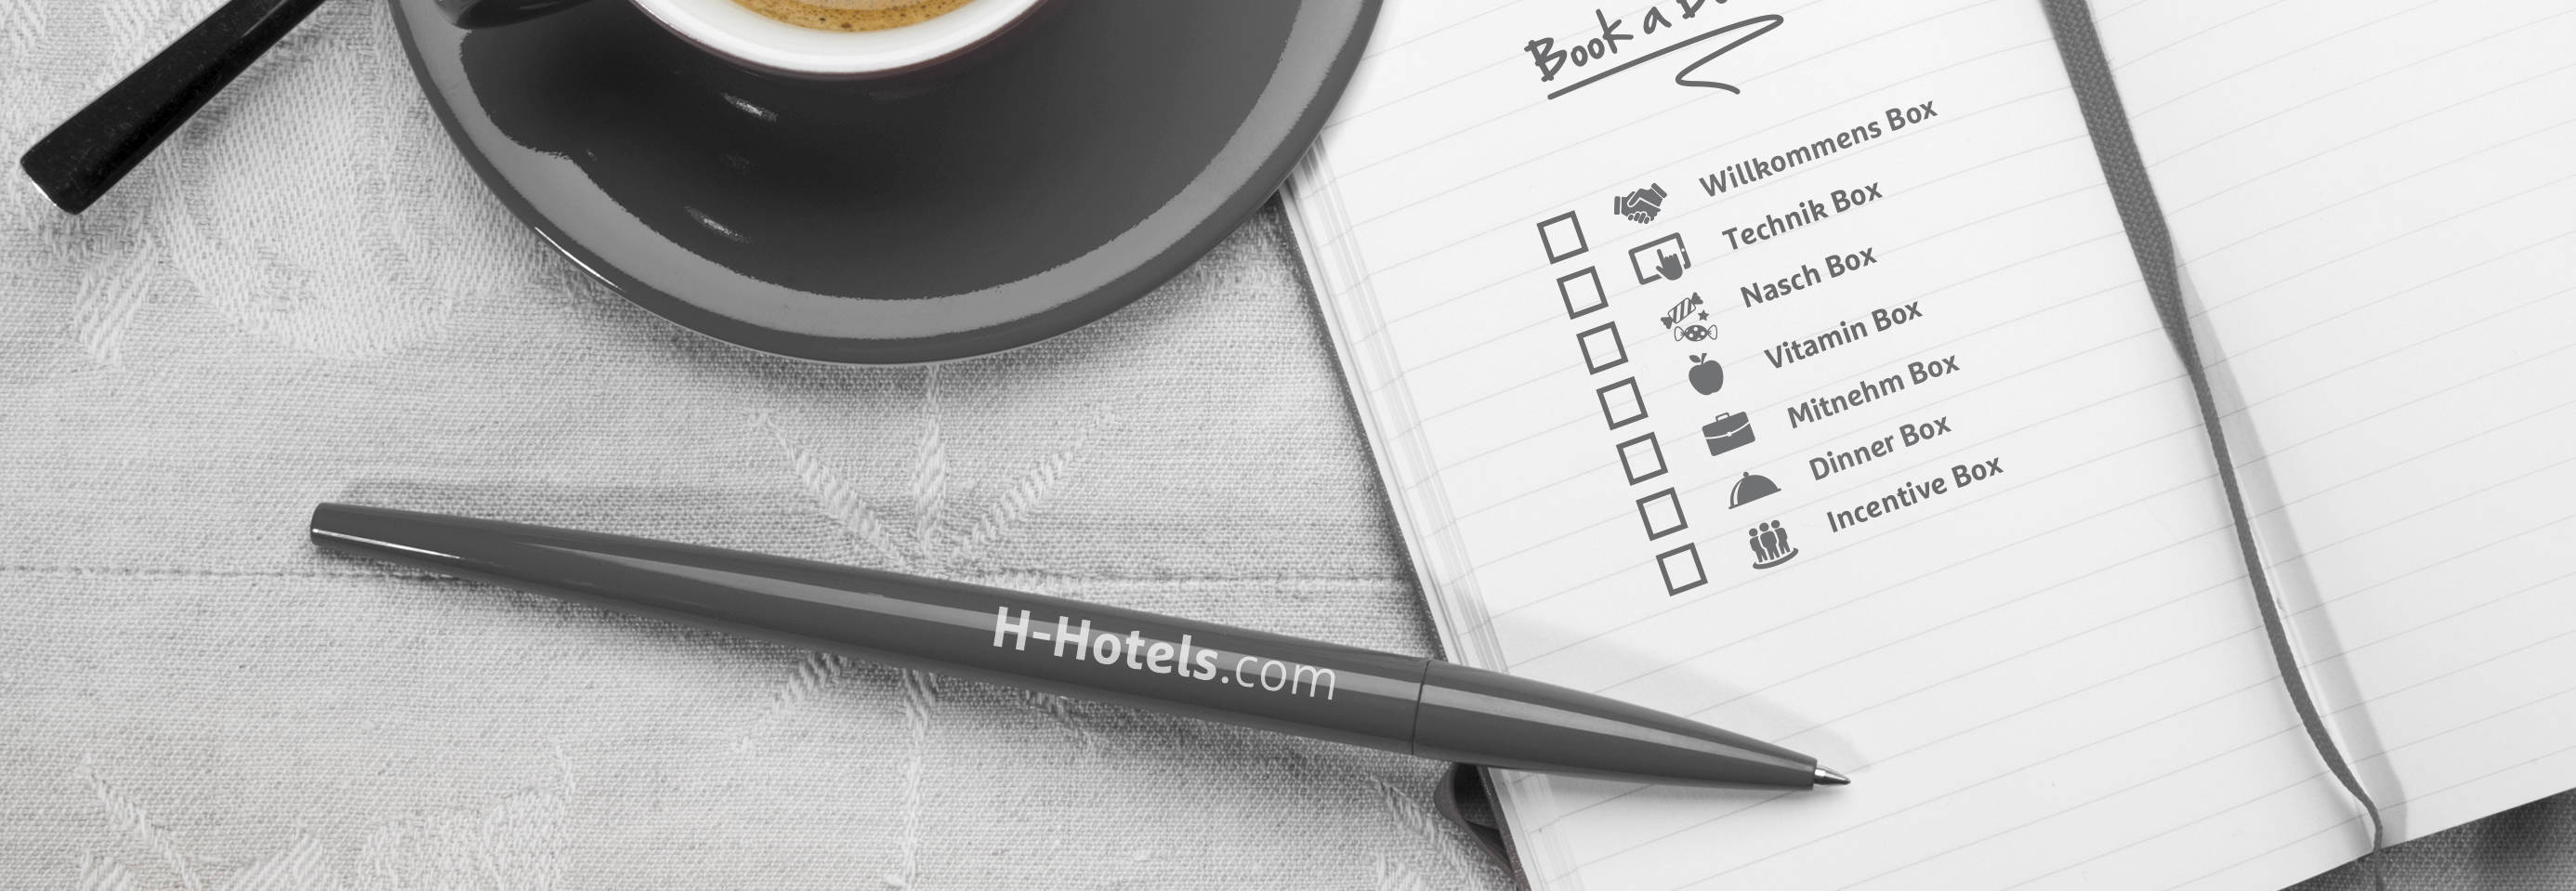 Optional add-ons - meetings with H-Hotels.com